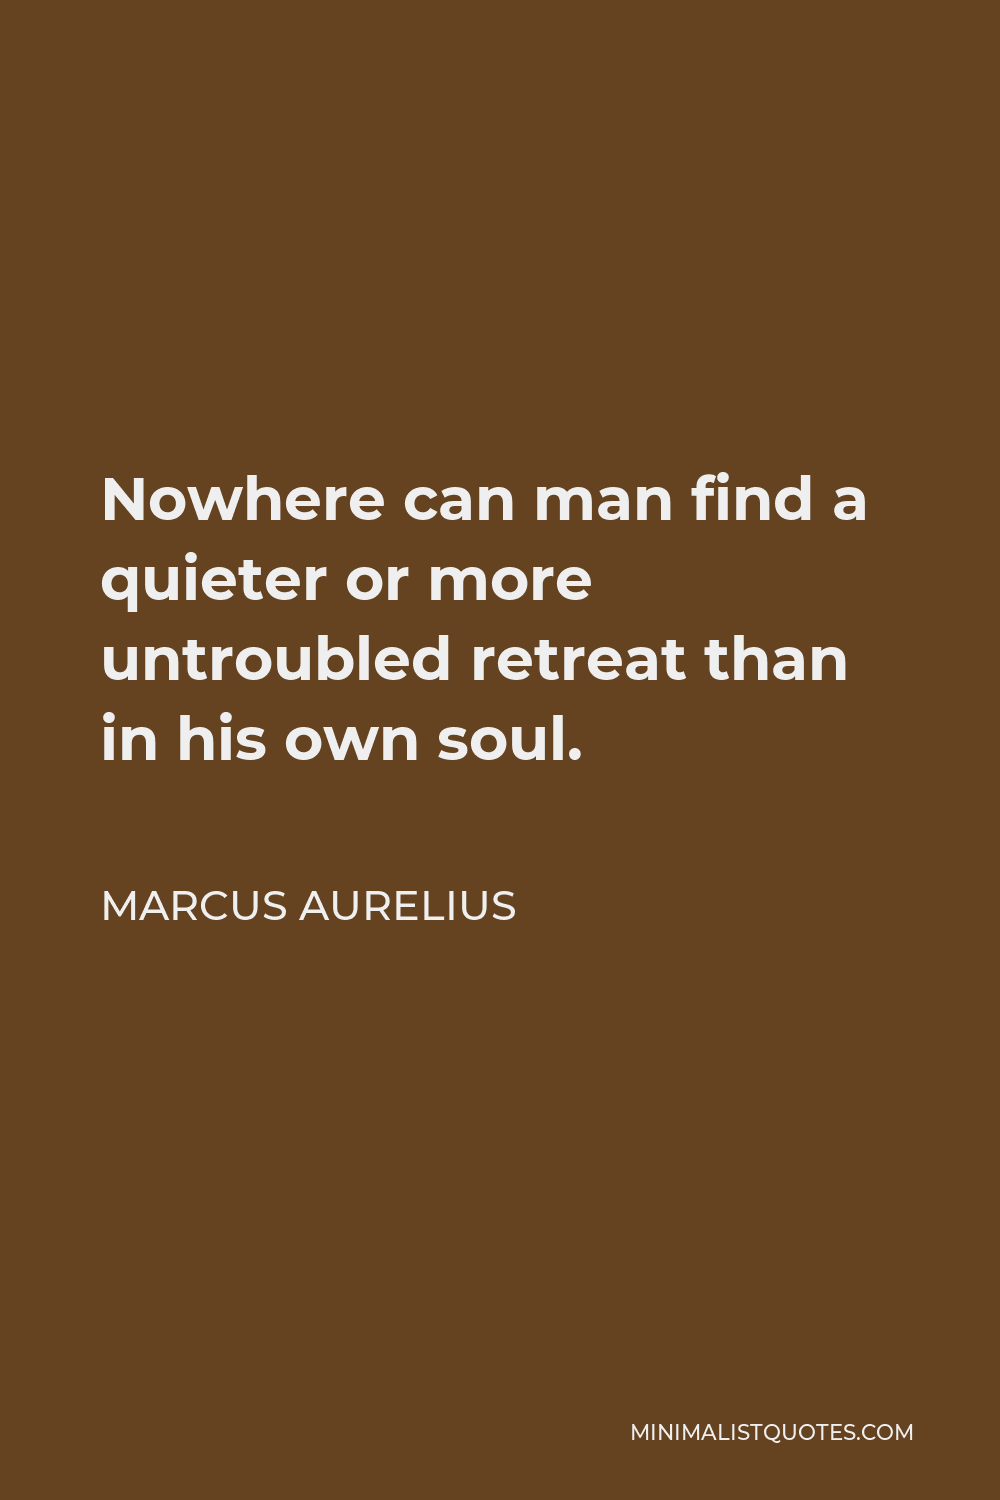 Marcus Aurelius Quote - Nowhere can man find a quieter or more untroubled retreat than in his own soul.